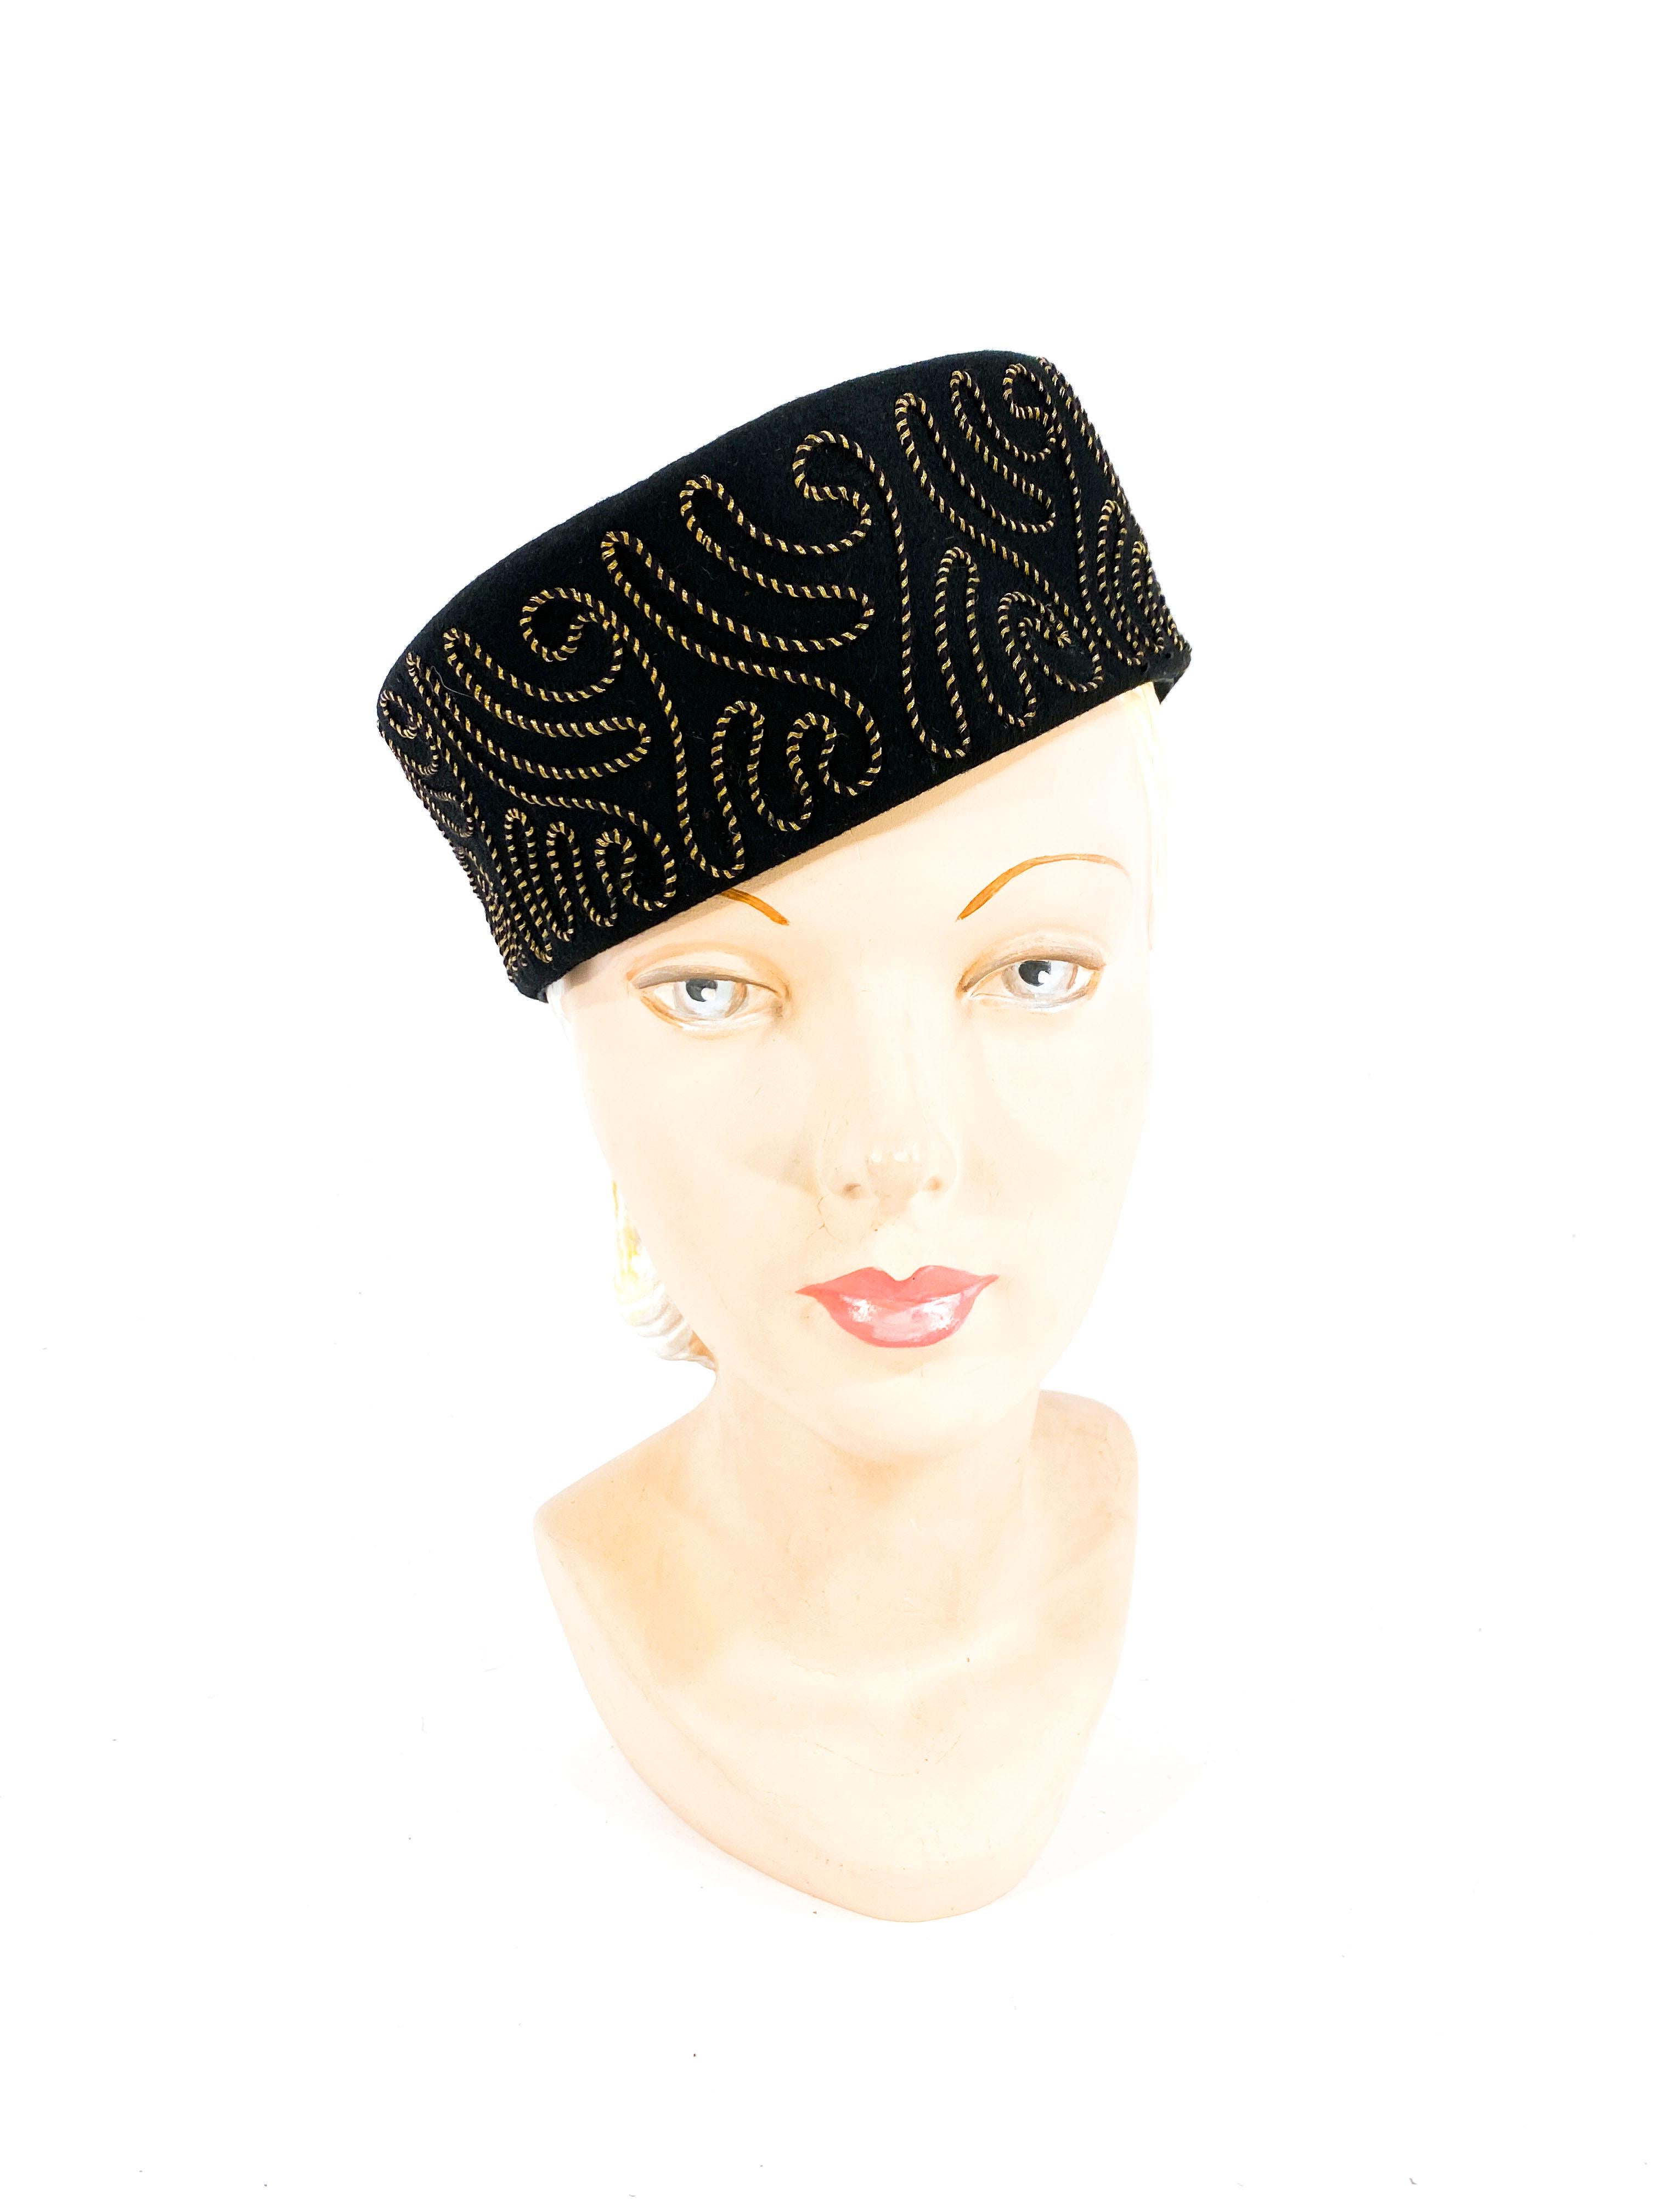 Late 1930s to early 1940s black sculpted wool felt cossack/perch hat featuring a silk and gold metallic sous-tâche embroidery. Avant-garde design with detailing on two-thirds of the entire brim.